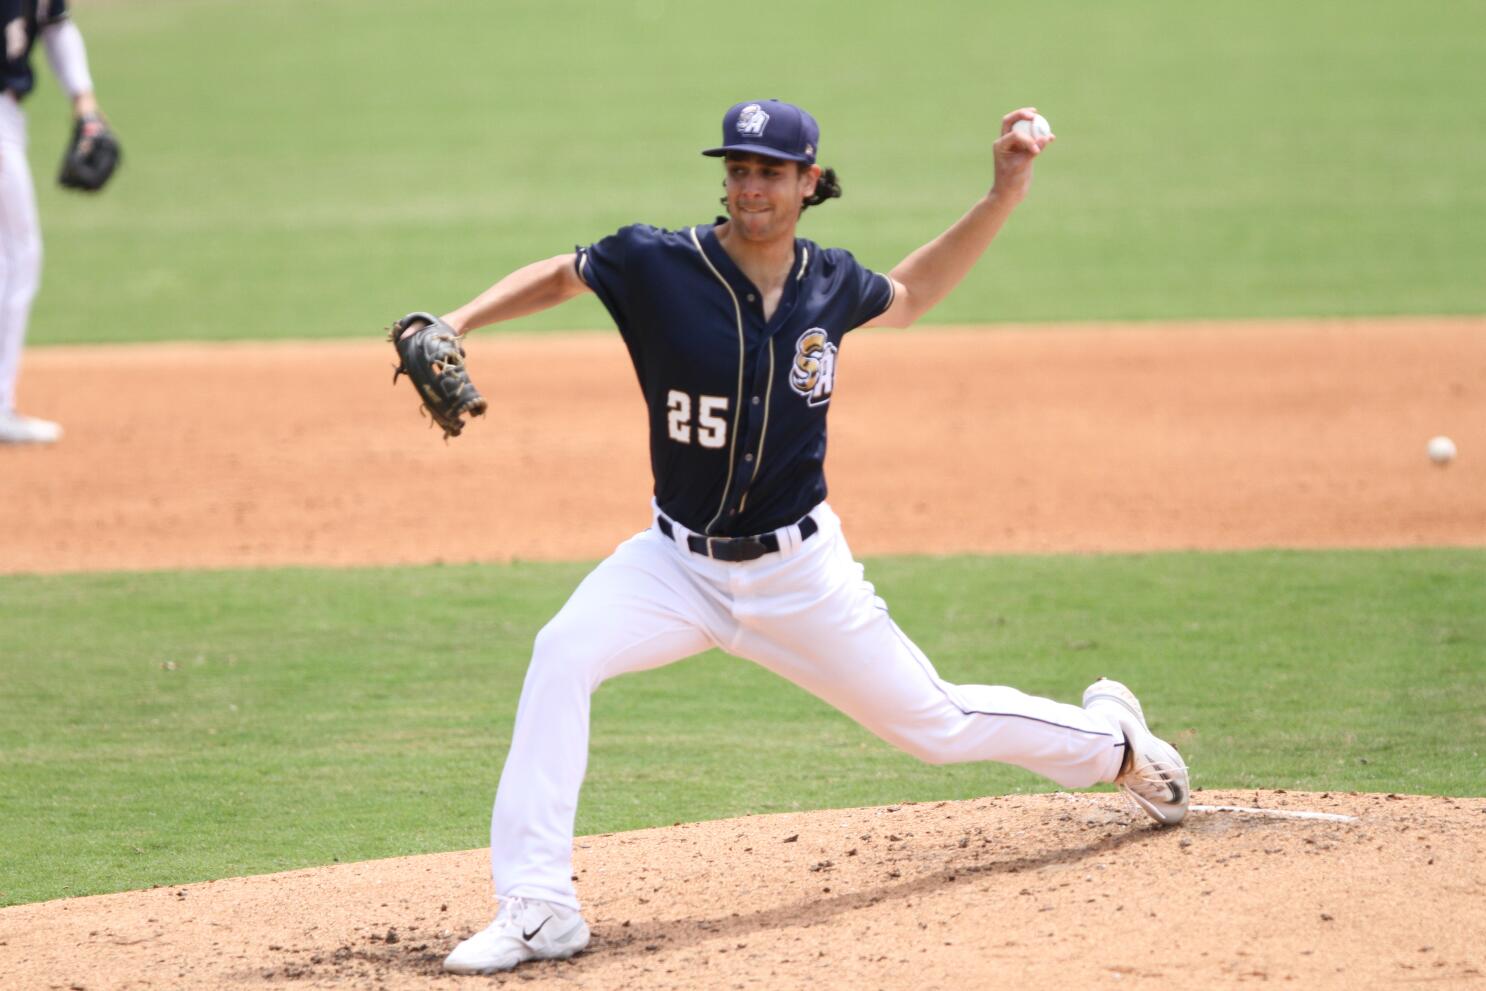 Padres' 16-year-old prospect makes minor league debut, doubles in